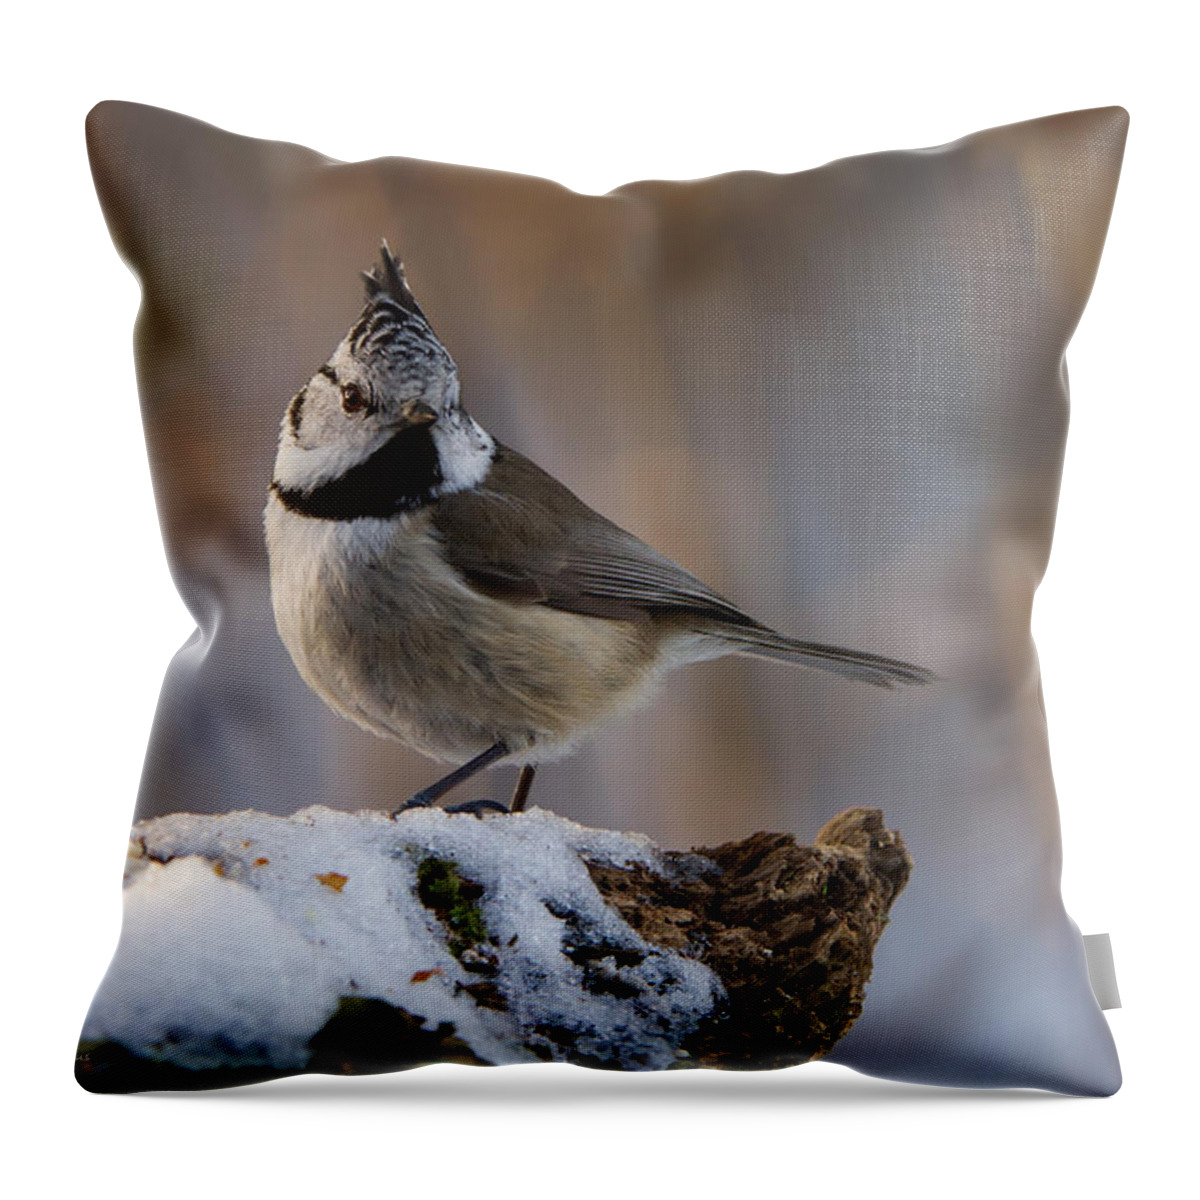 Brown Eyed Girl Throw Pillow featuring the photograph Brown Eyed Girl by Torbjorn Swenelius